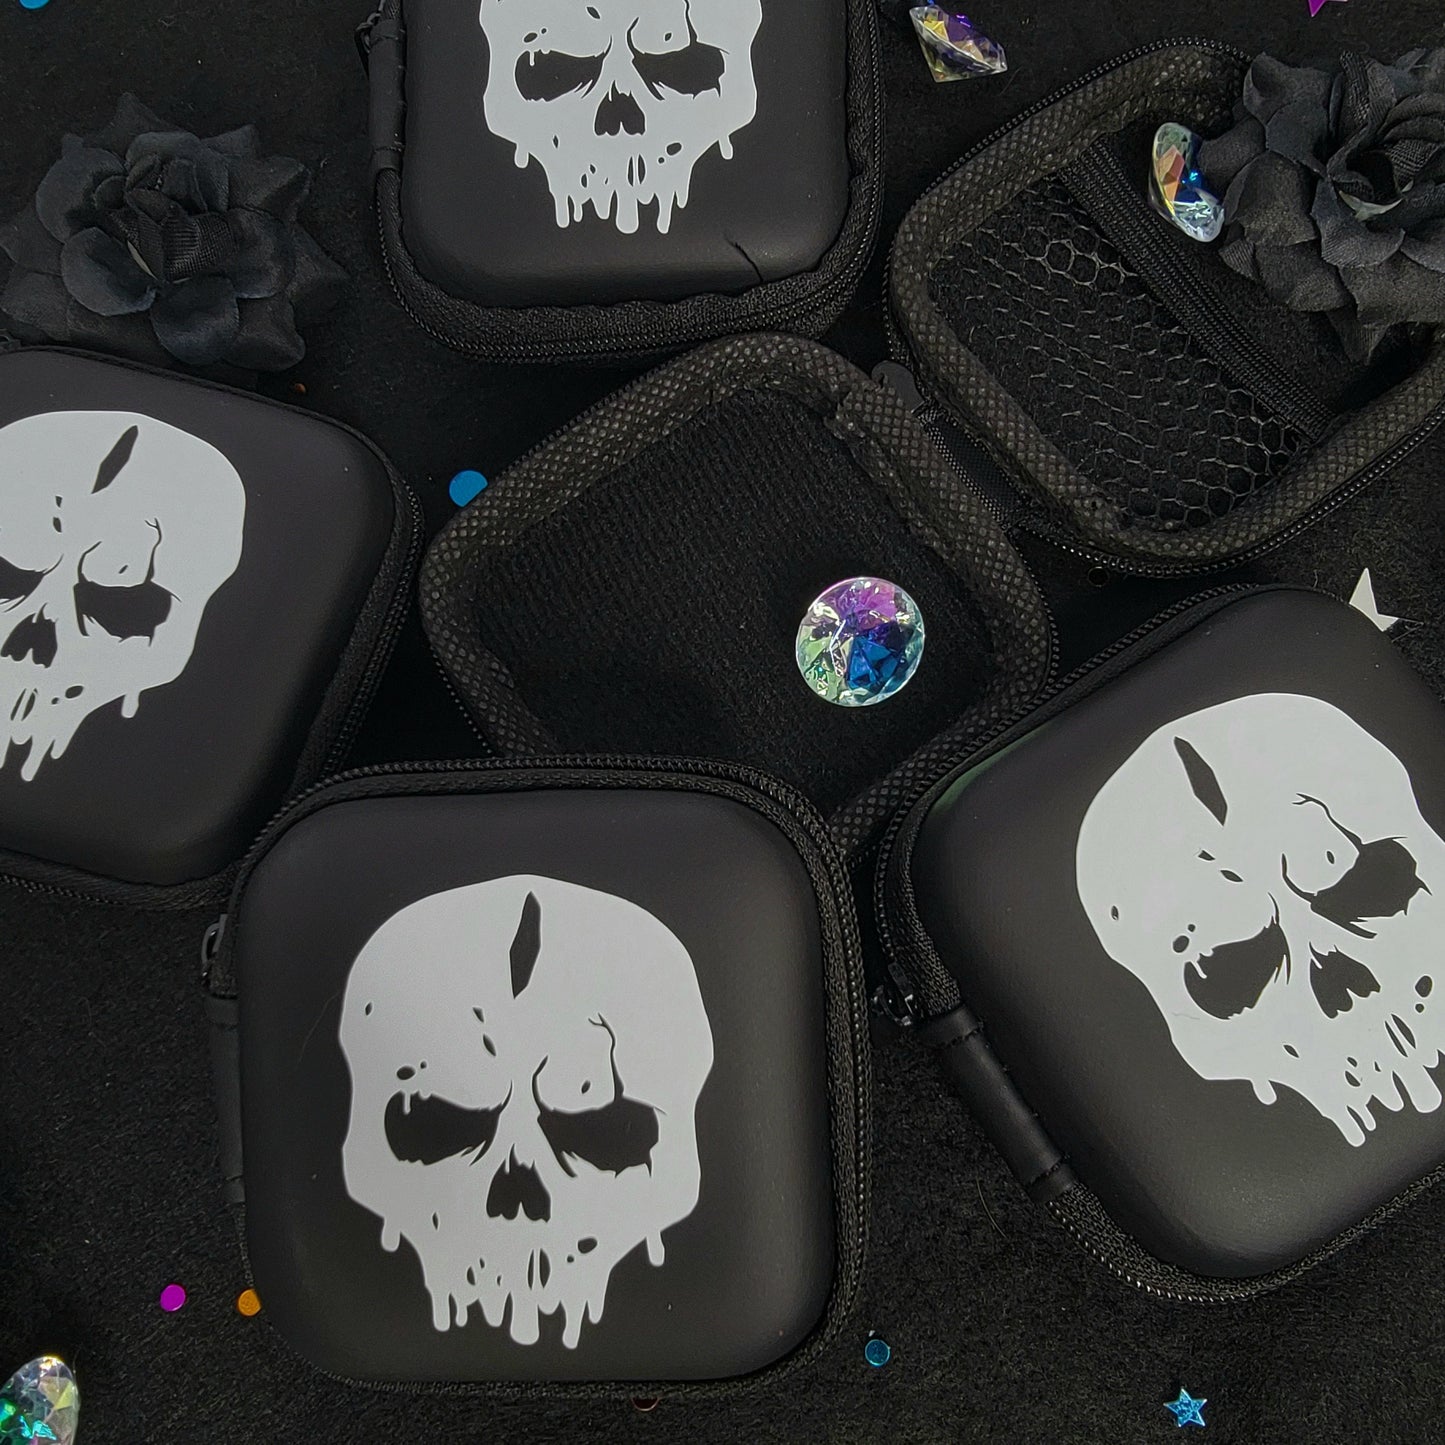 Skull Small Earbuds / Coin Holder